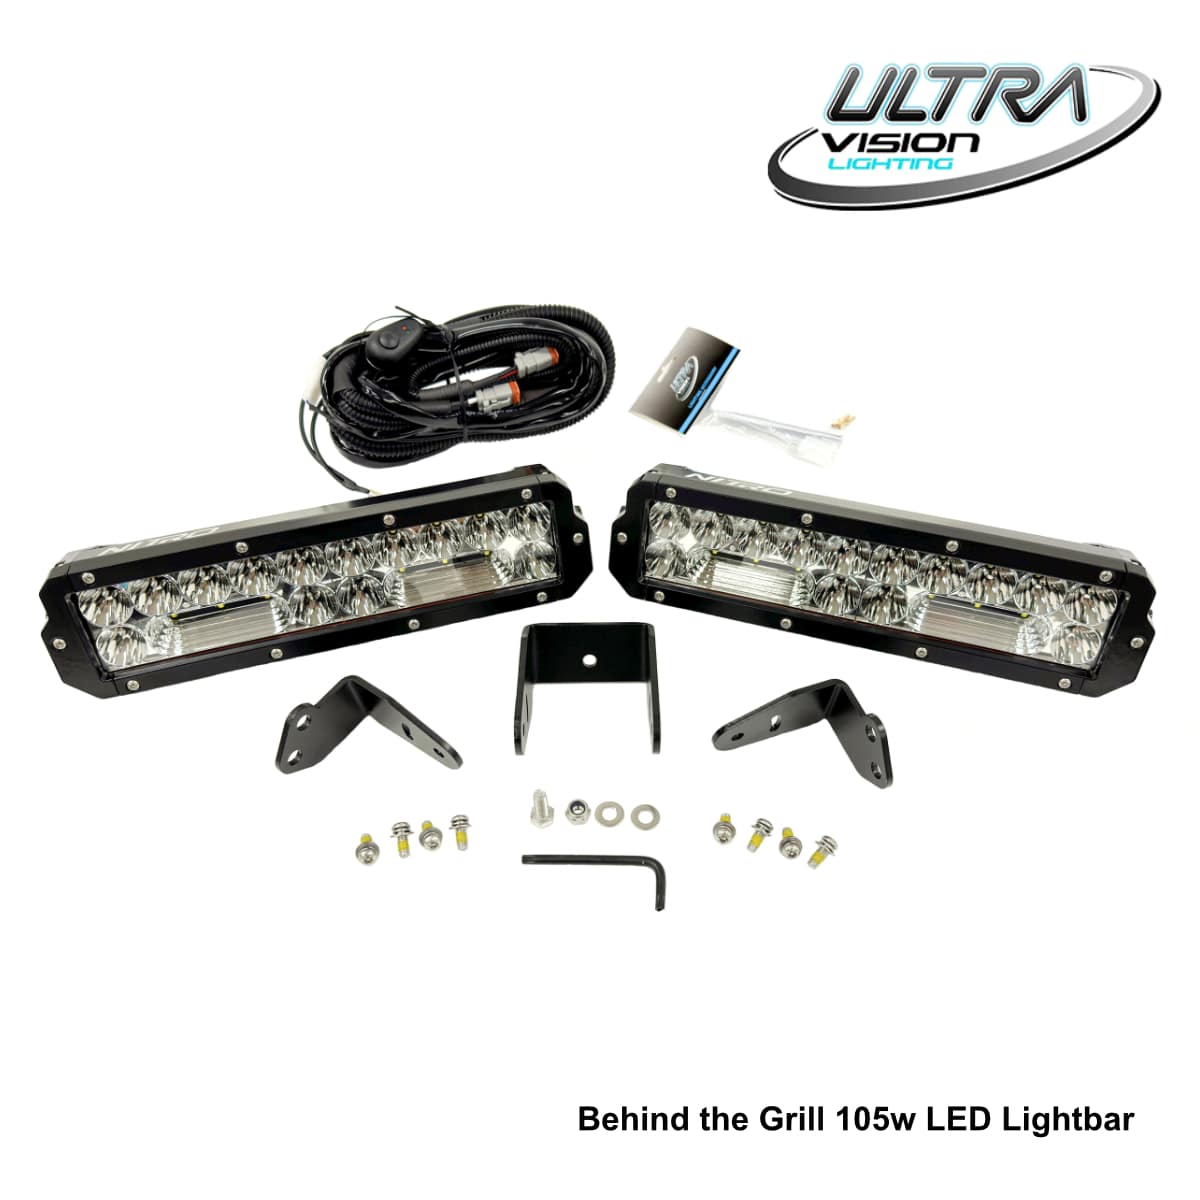 Behind the Grill 105w LED Light Bar